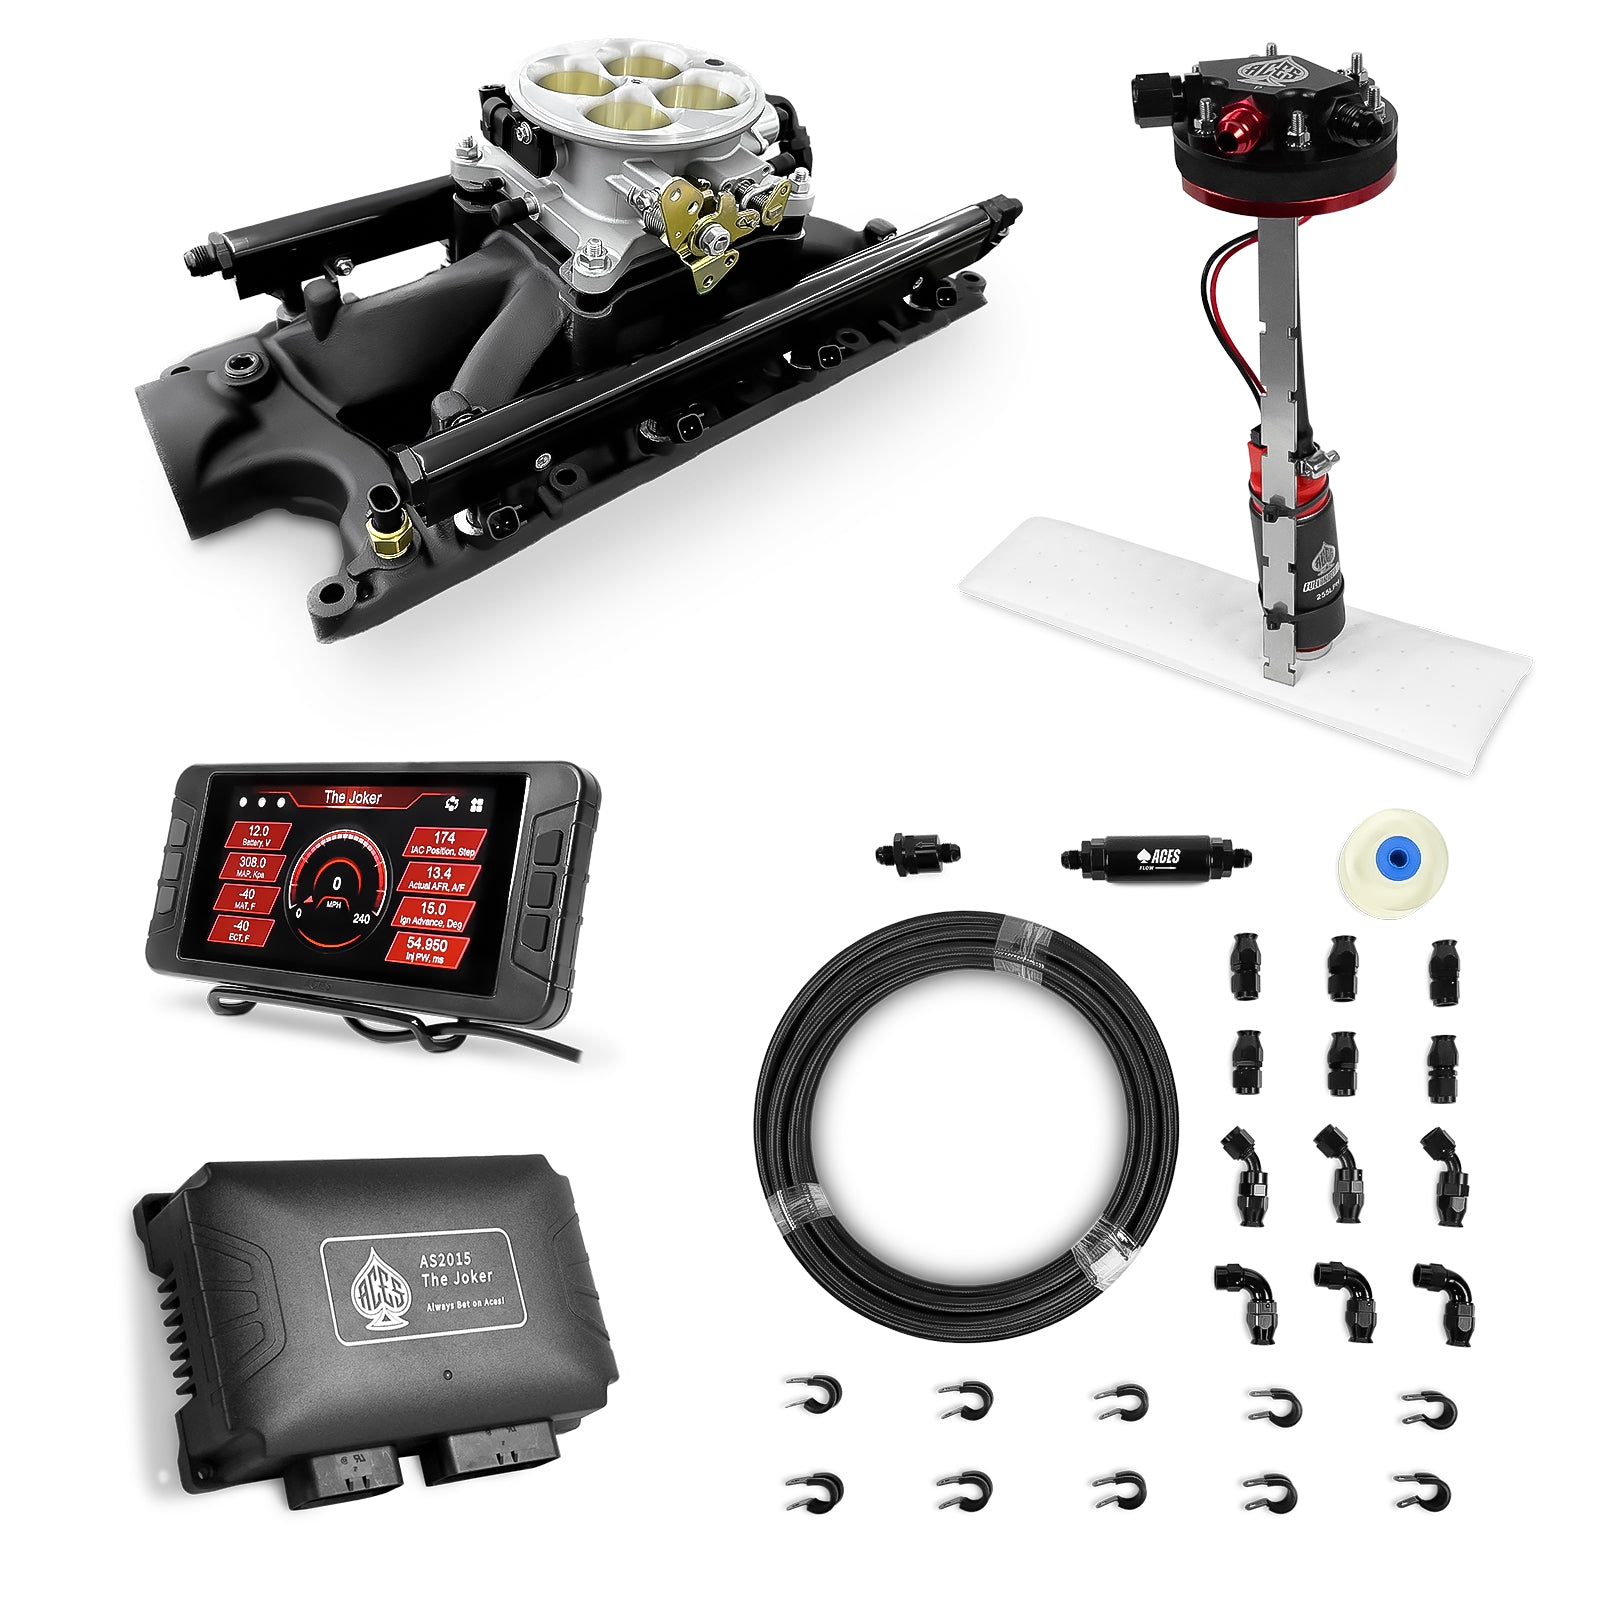 The Joker Sequential EFI/CDI Master Kits